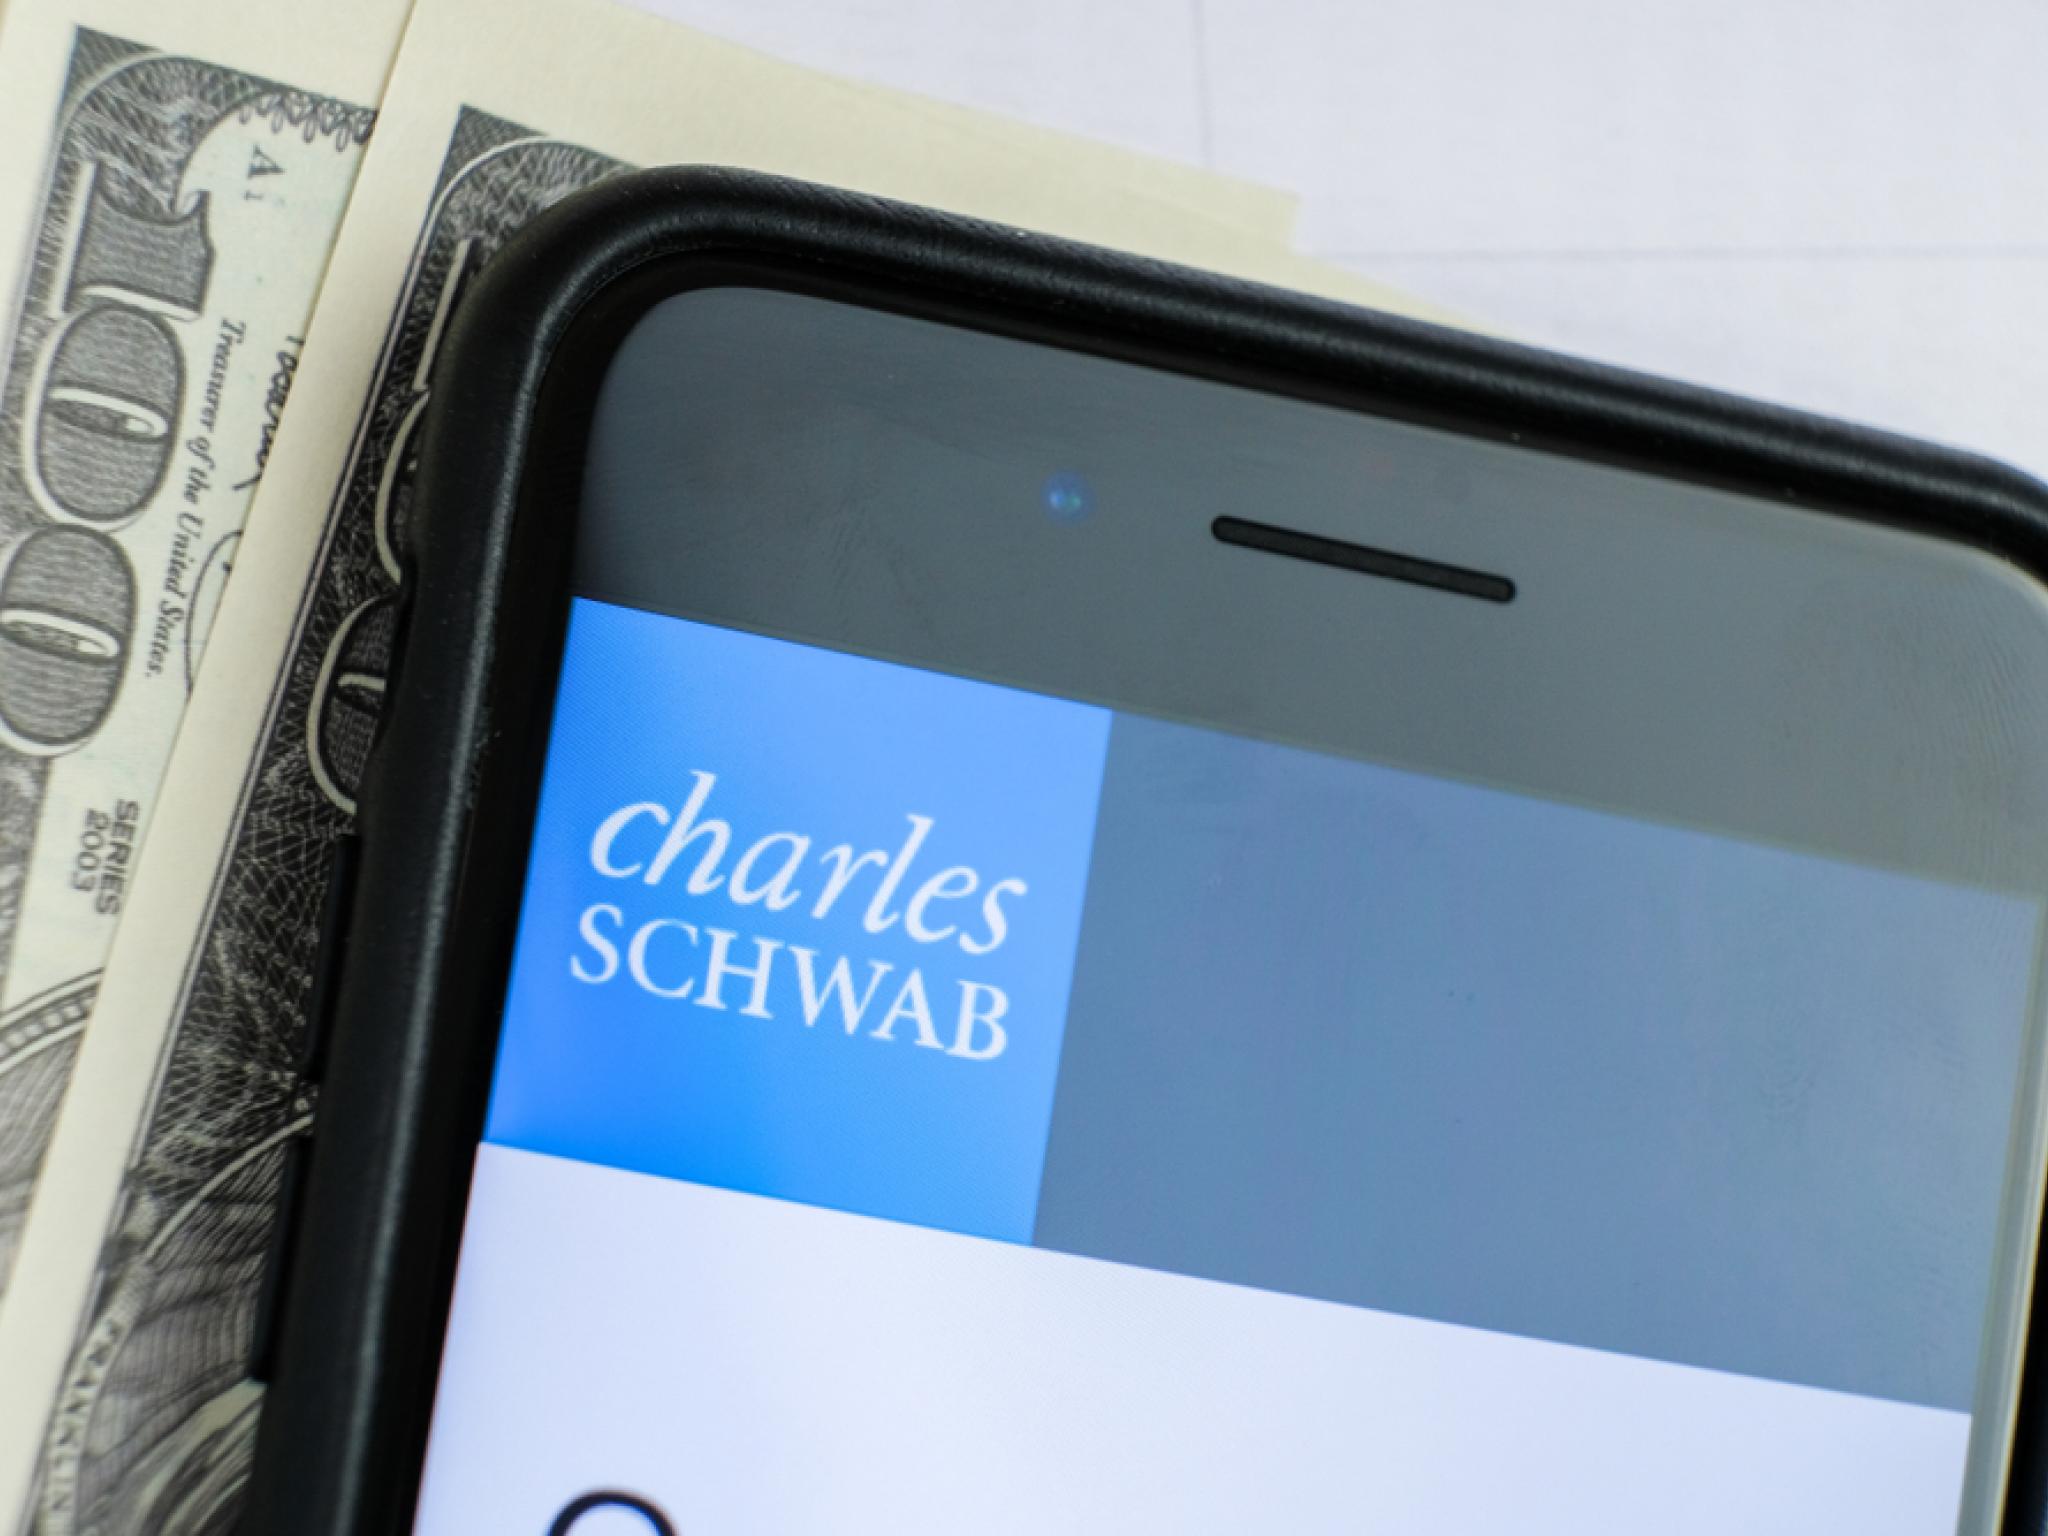  whats-going-on-with-charles-schwab-shares-today 